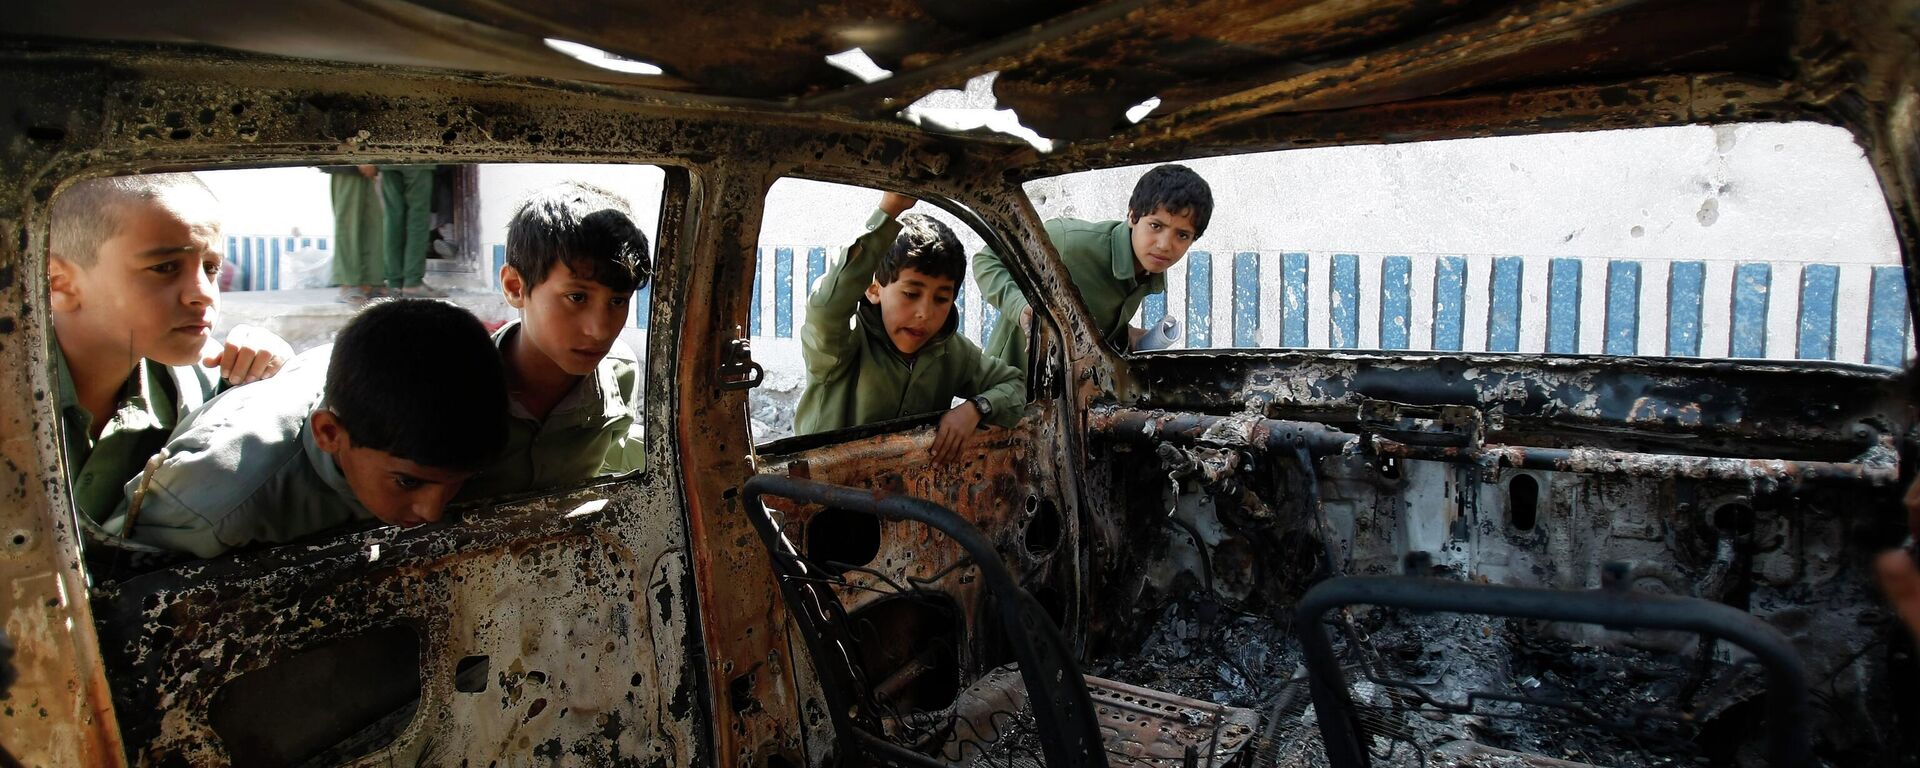 FILE – This May 27, 2014, file photo shows Yemeni boys looking at a vehicle destroyed during a police raid on an al-Qaida militants' hideout in the Arhab region, north of Sanaa, Yemen, which resulted in the death of five militants and six soldiers. According to the Obama administration’s most recent terrorism report, released by the State Department in late April, al-Qaida's core leadership has been degraded, limiting its ability to launch attacks and lead its followers. This has resulted in more autonomous and more aggressive affiliates, notably in Yemen, Syria, Iraq, northwest Africa and Somalia, according to the report, which recorded a 43 percent increase in terrorist attacks worldwide from 2012 to 2013. (AP Photo/Hani Mohammed) - Sputnik International, 1920, 01.04.2023